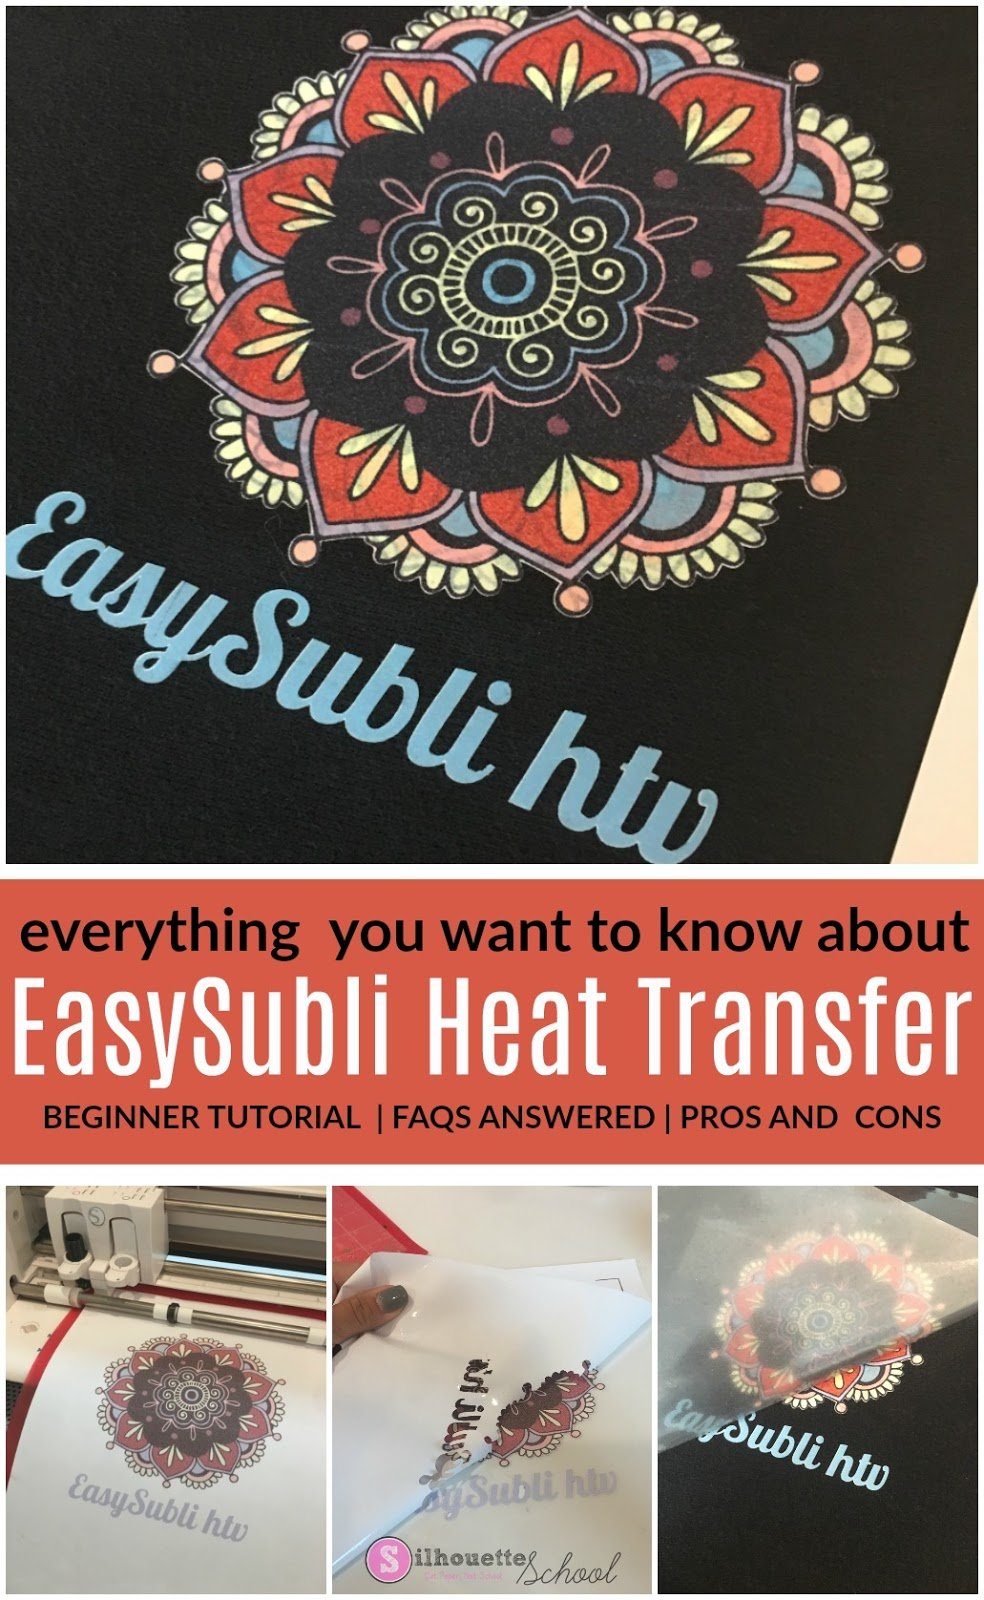 EasySubli HTV so you can sublimate without having to bleach #siser